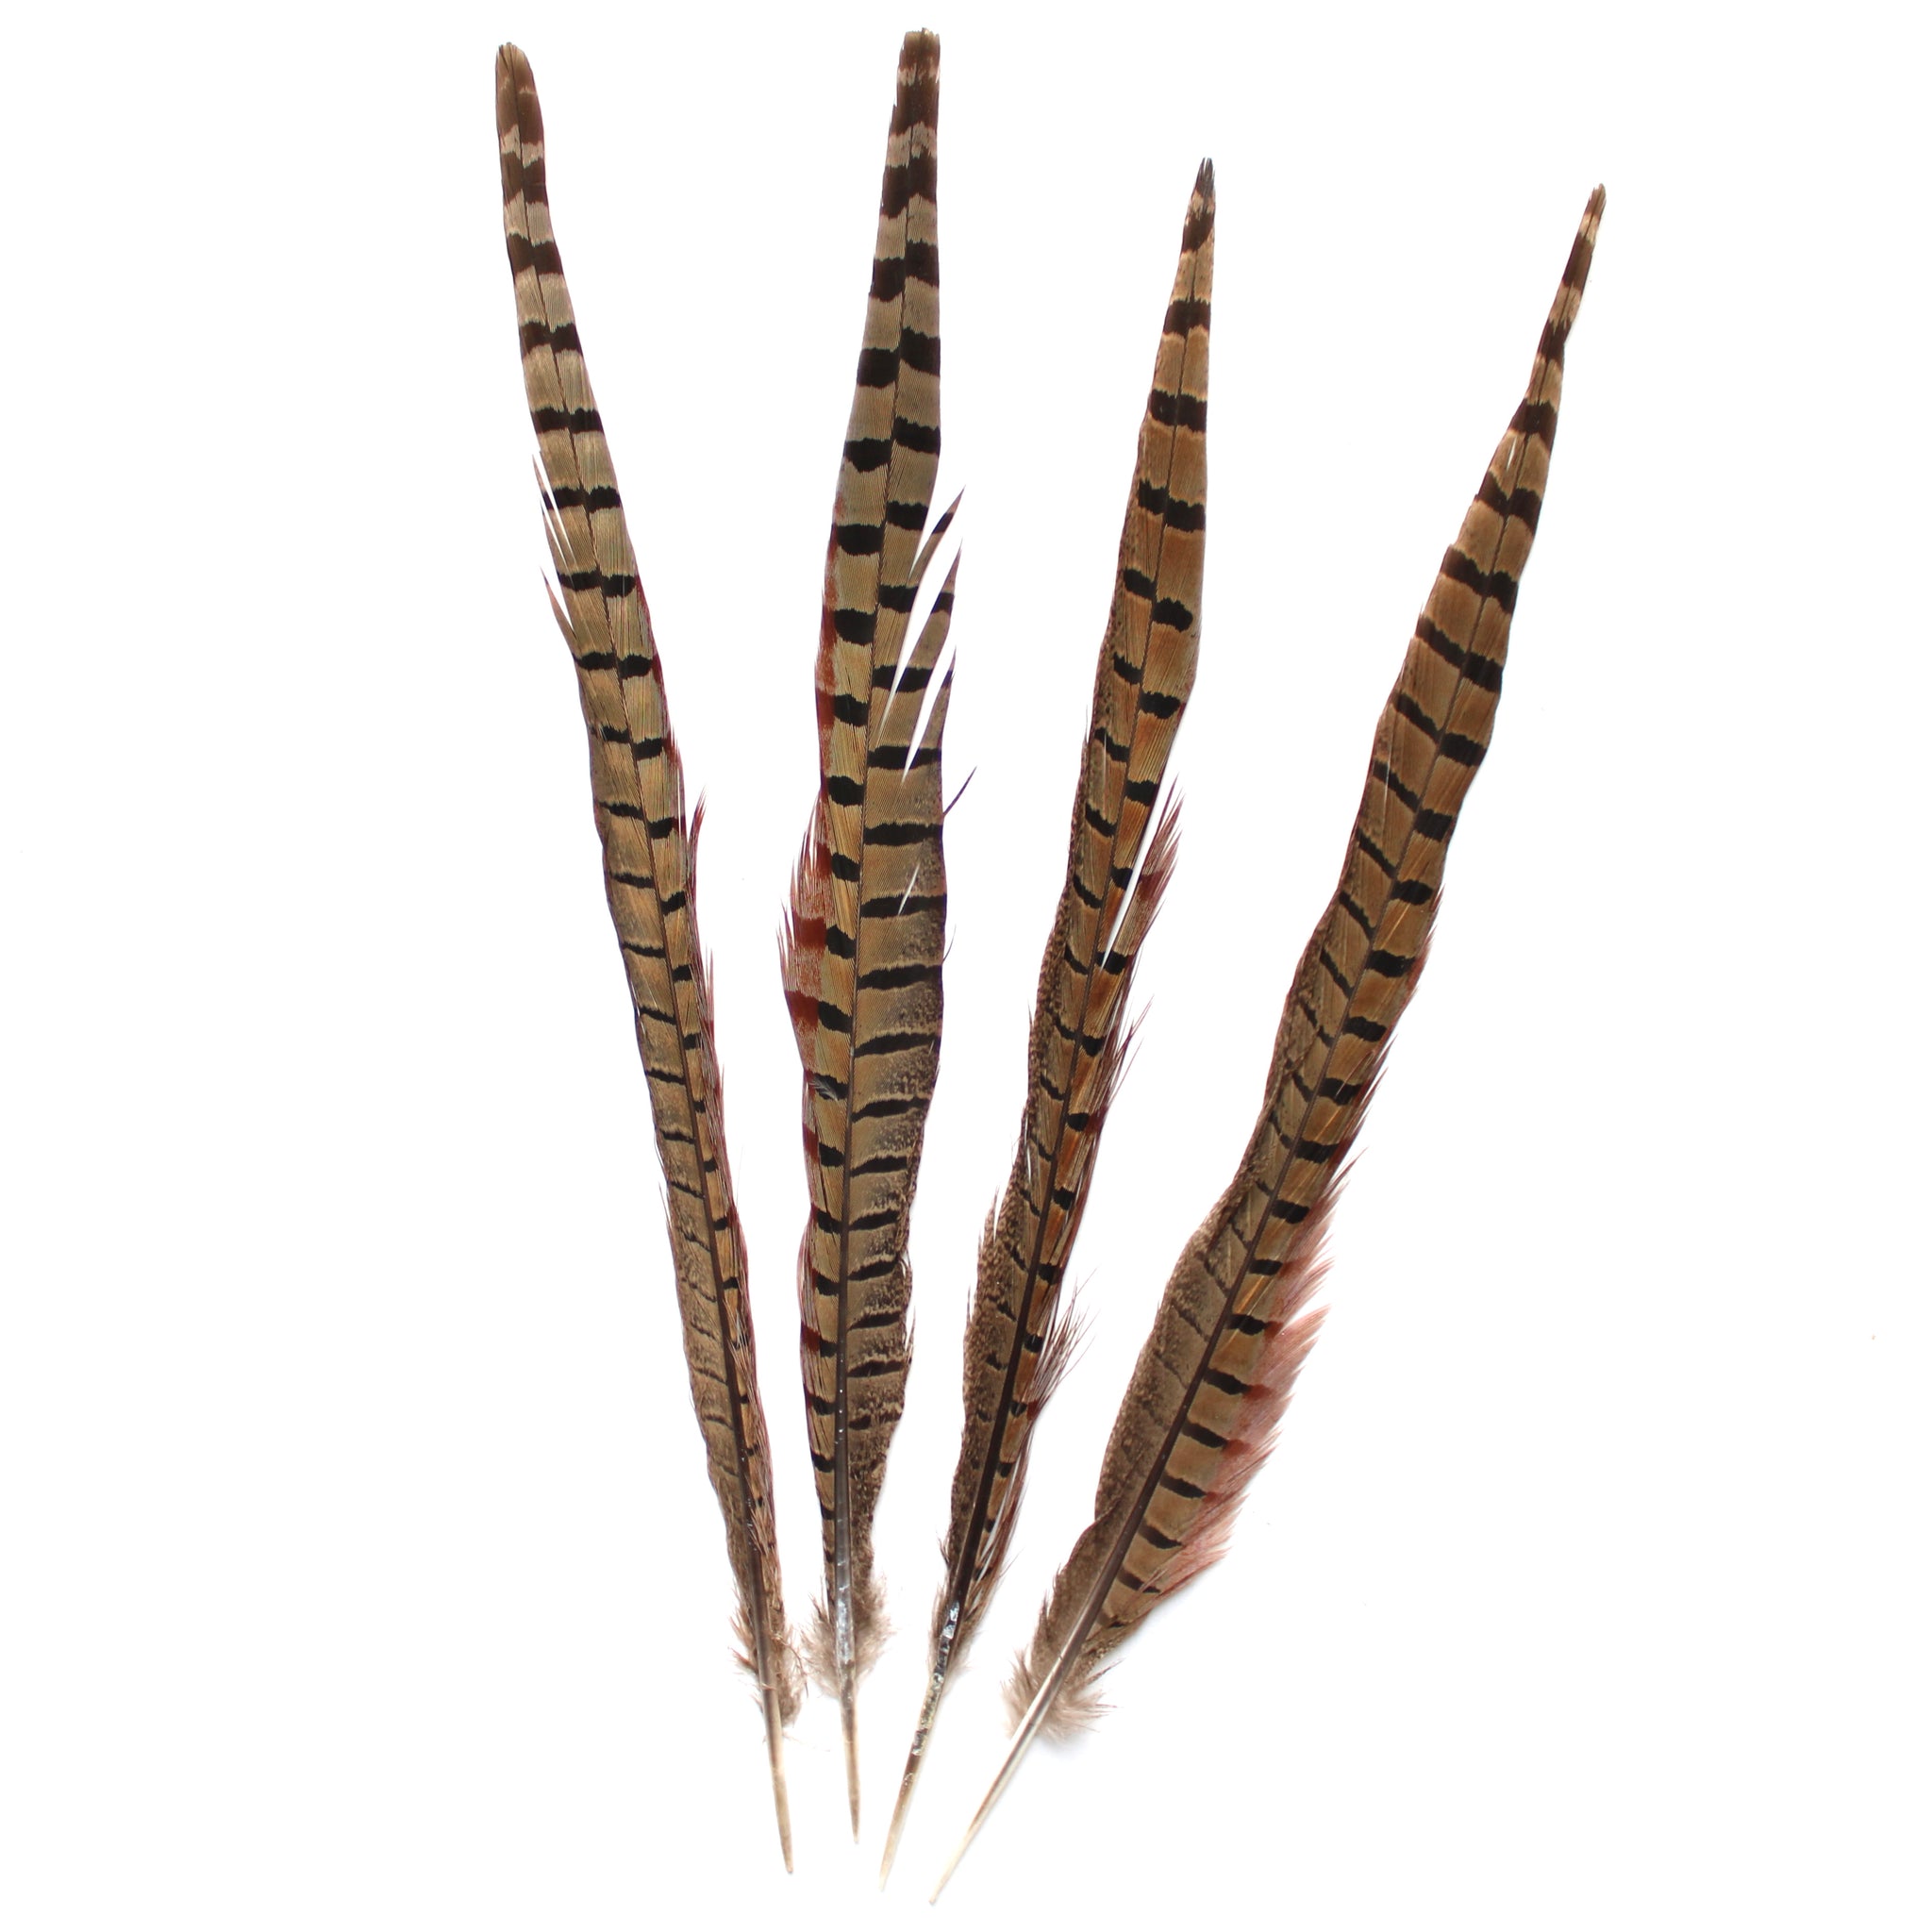  20pcs Female Pheasant Feather Natural Ringneck Tails